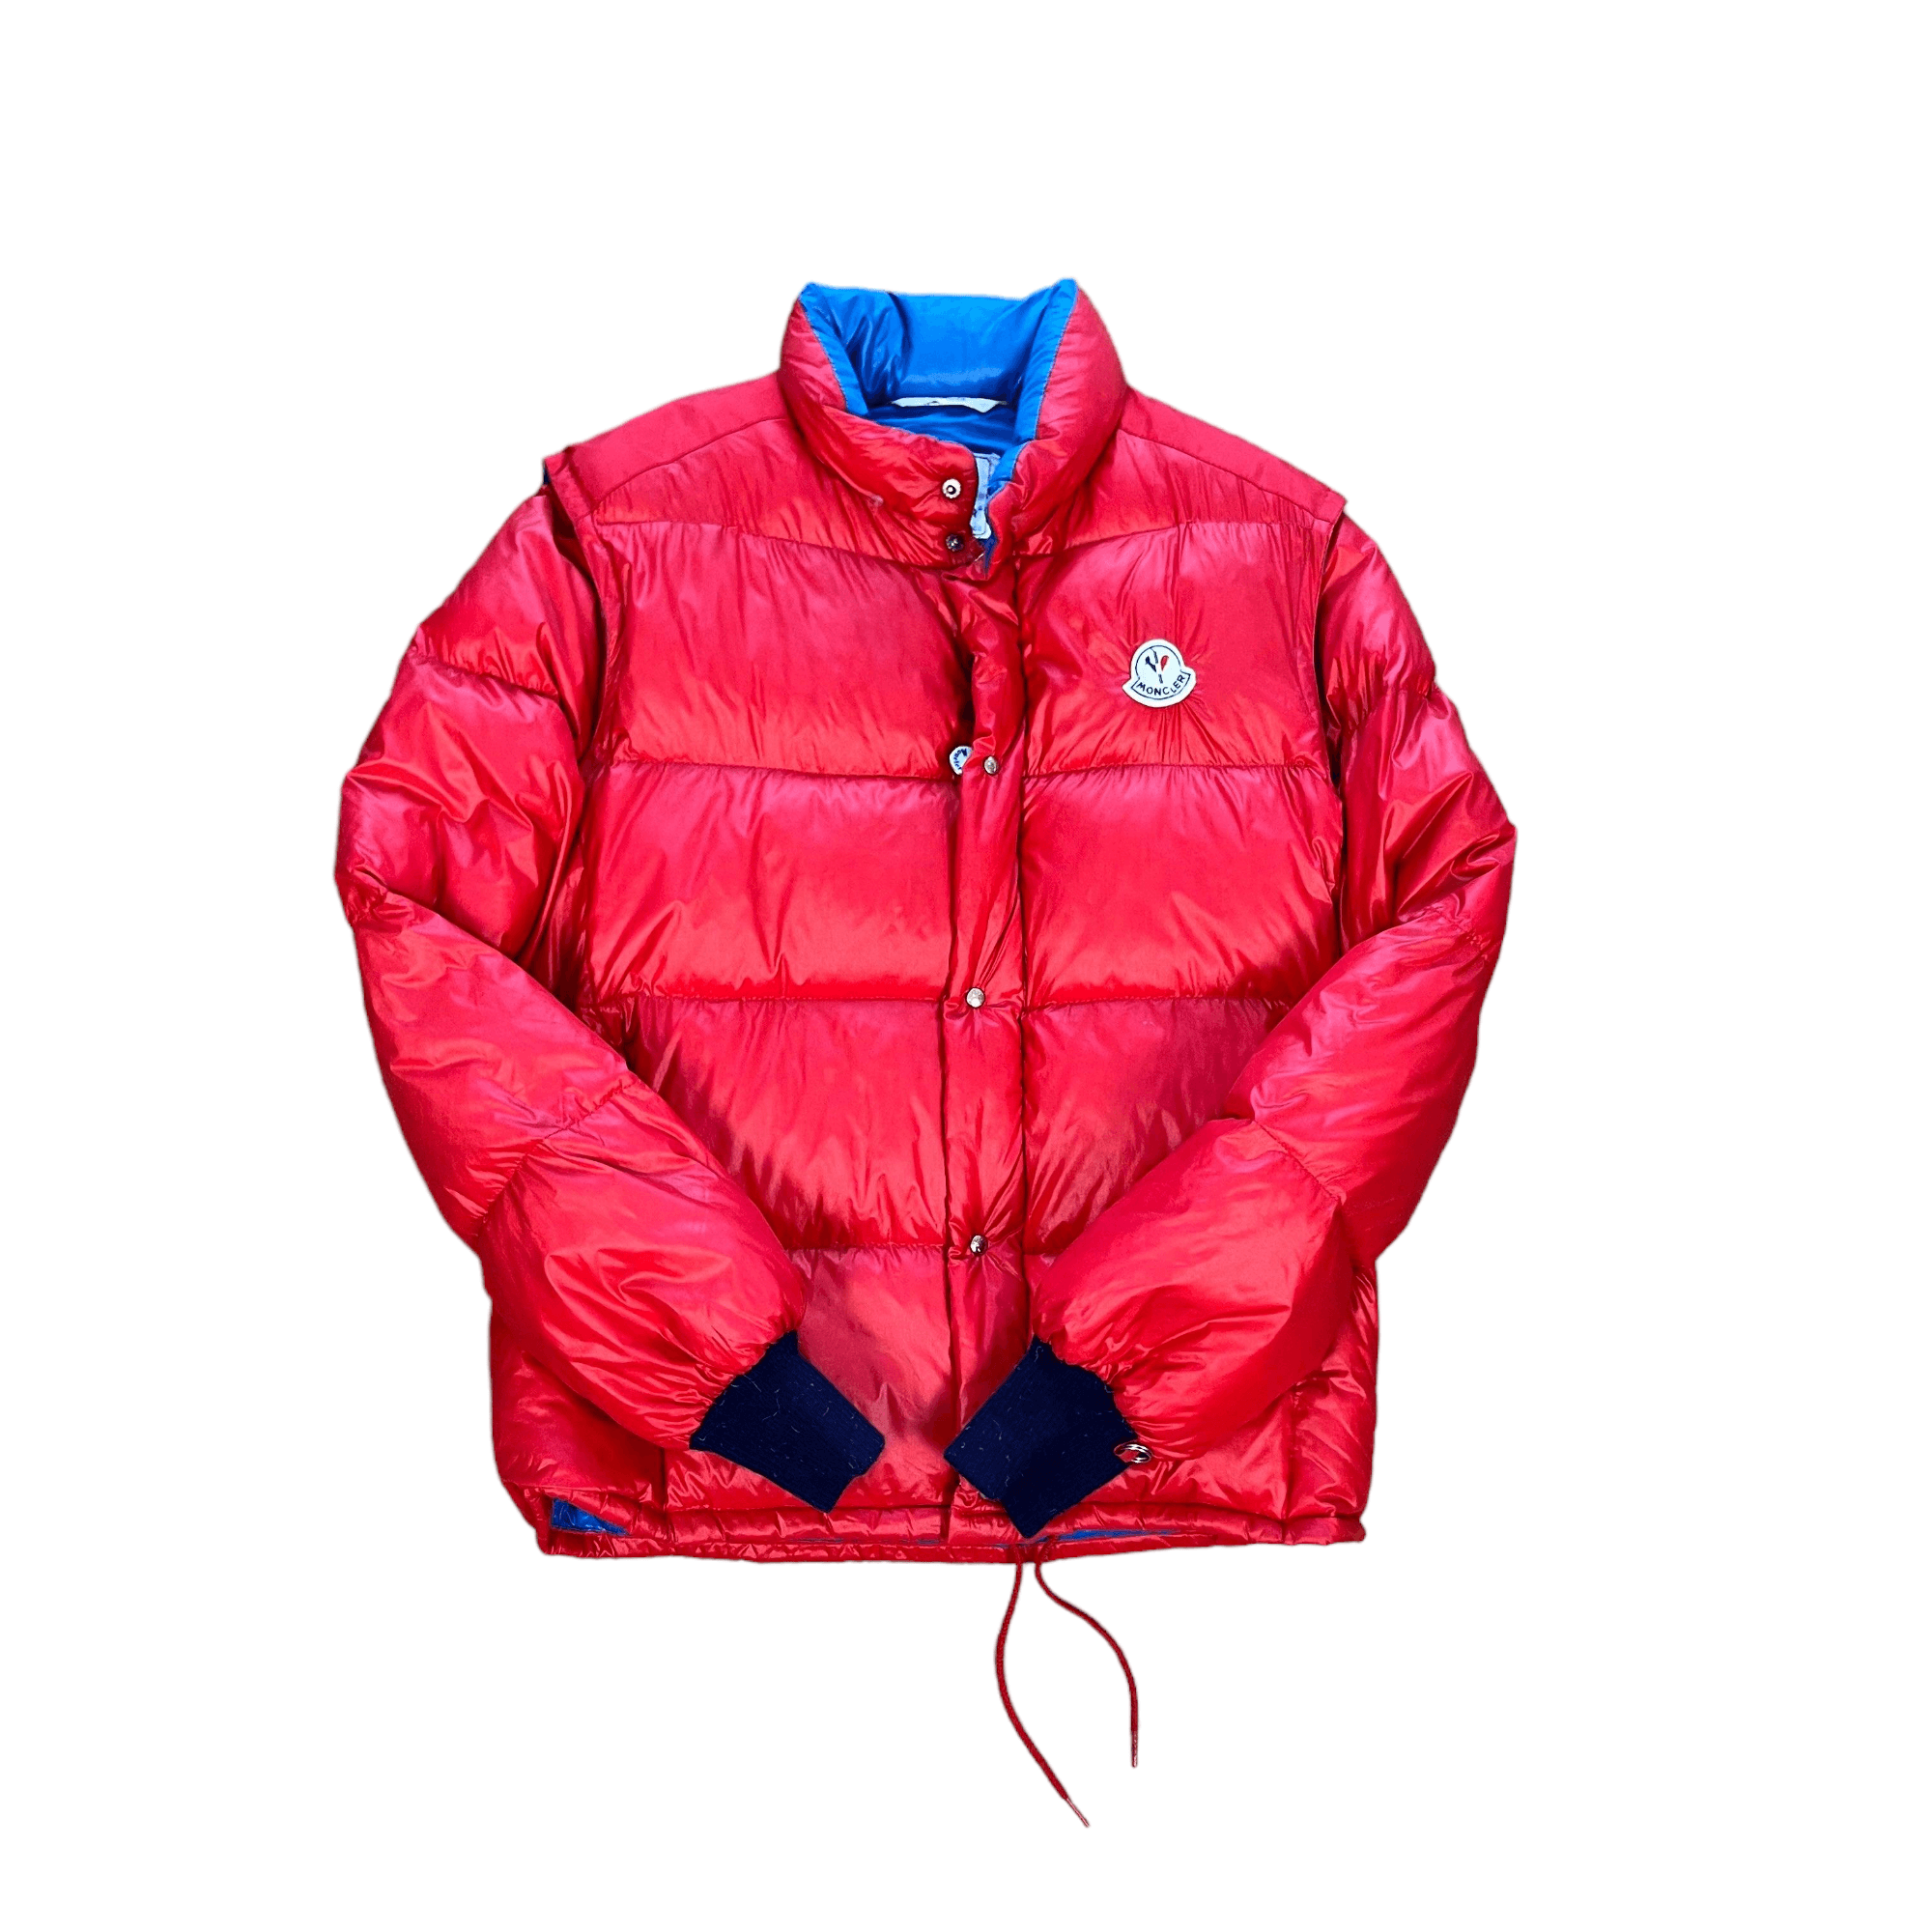 Vintage 90s Red Moncler Grenoble Puffer Coat - Small - The Streetwear Studio